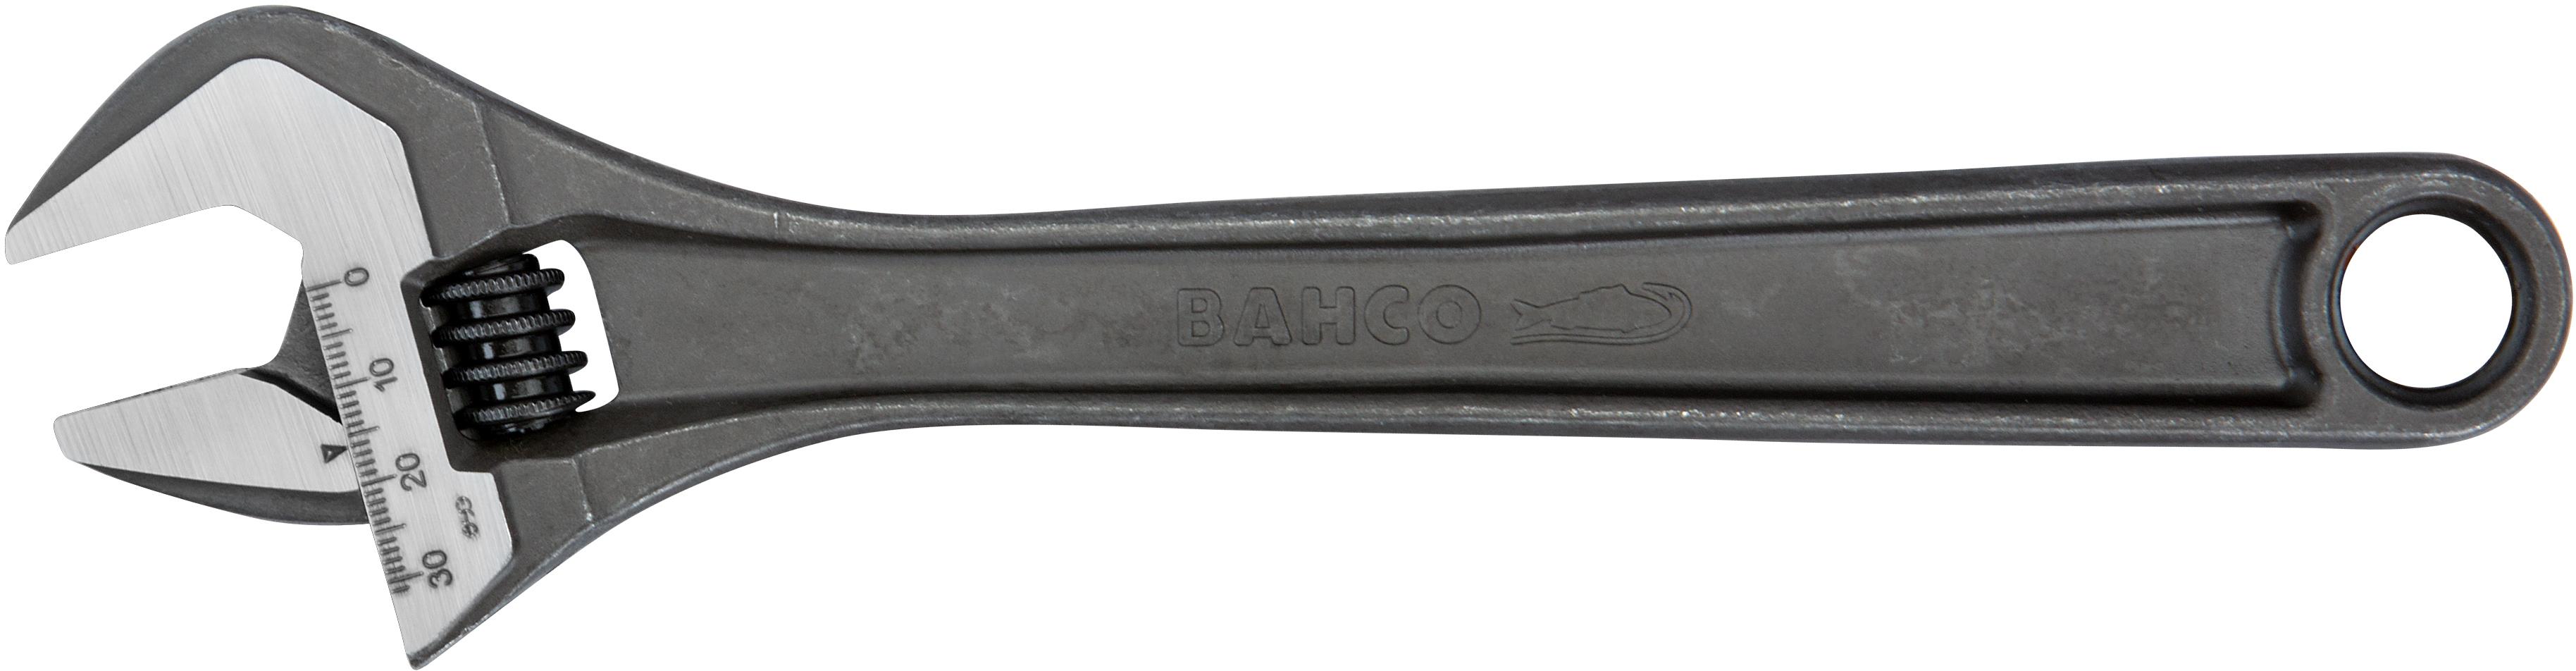 Bahco Adjustable Wrench 12 Inch 8073 34Mm